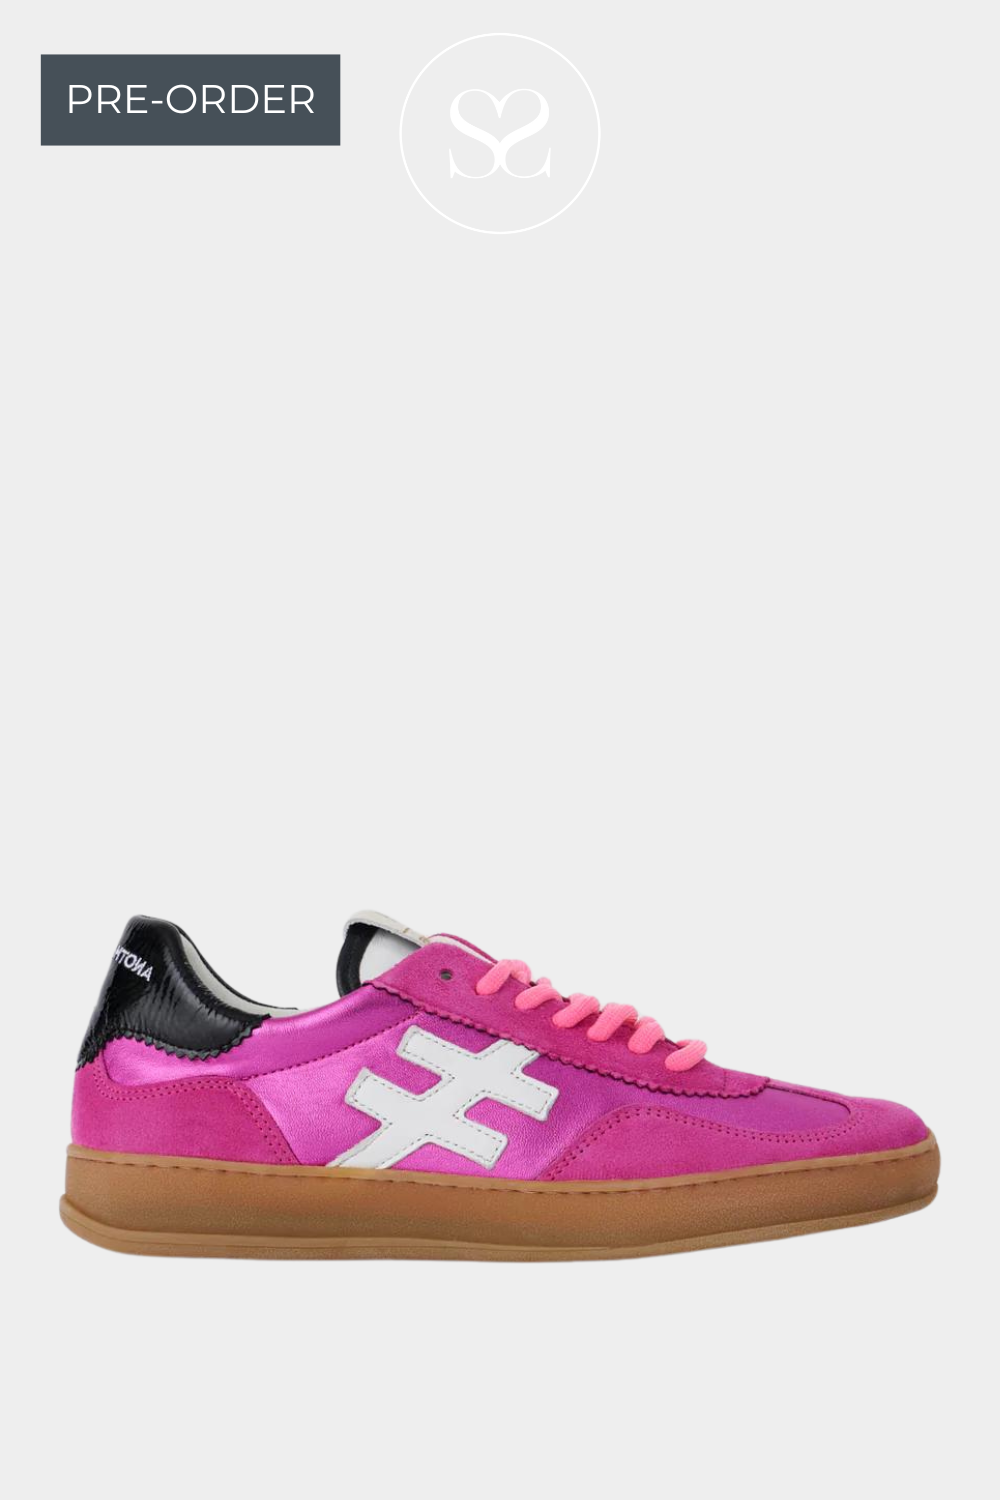 ANOTHER TREND ICONIC HOT PINK LEATHER TRAINER